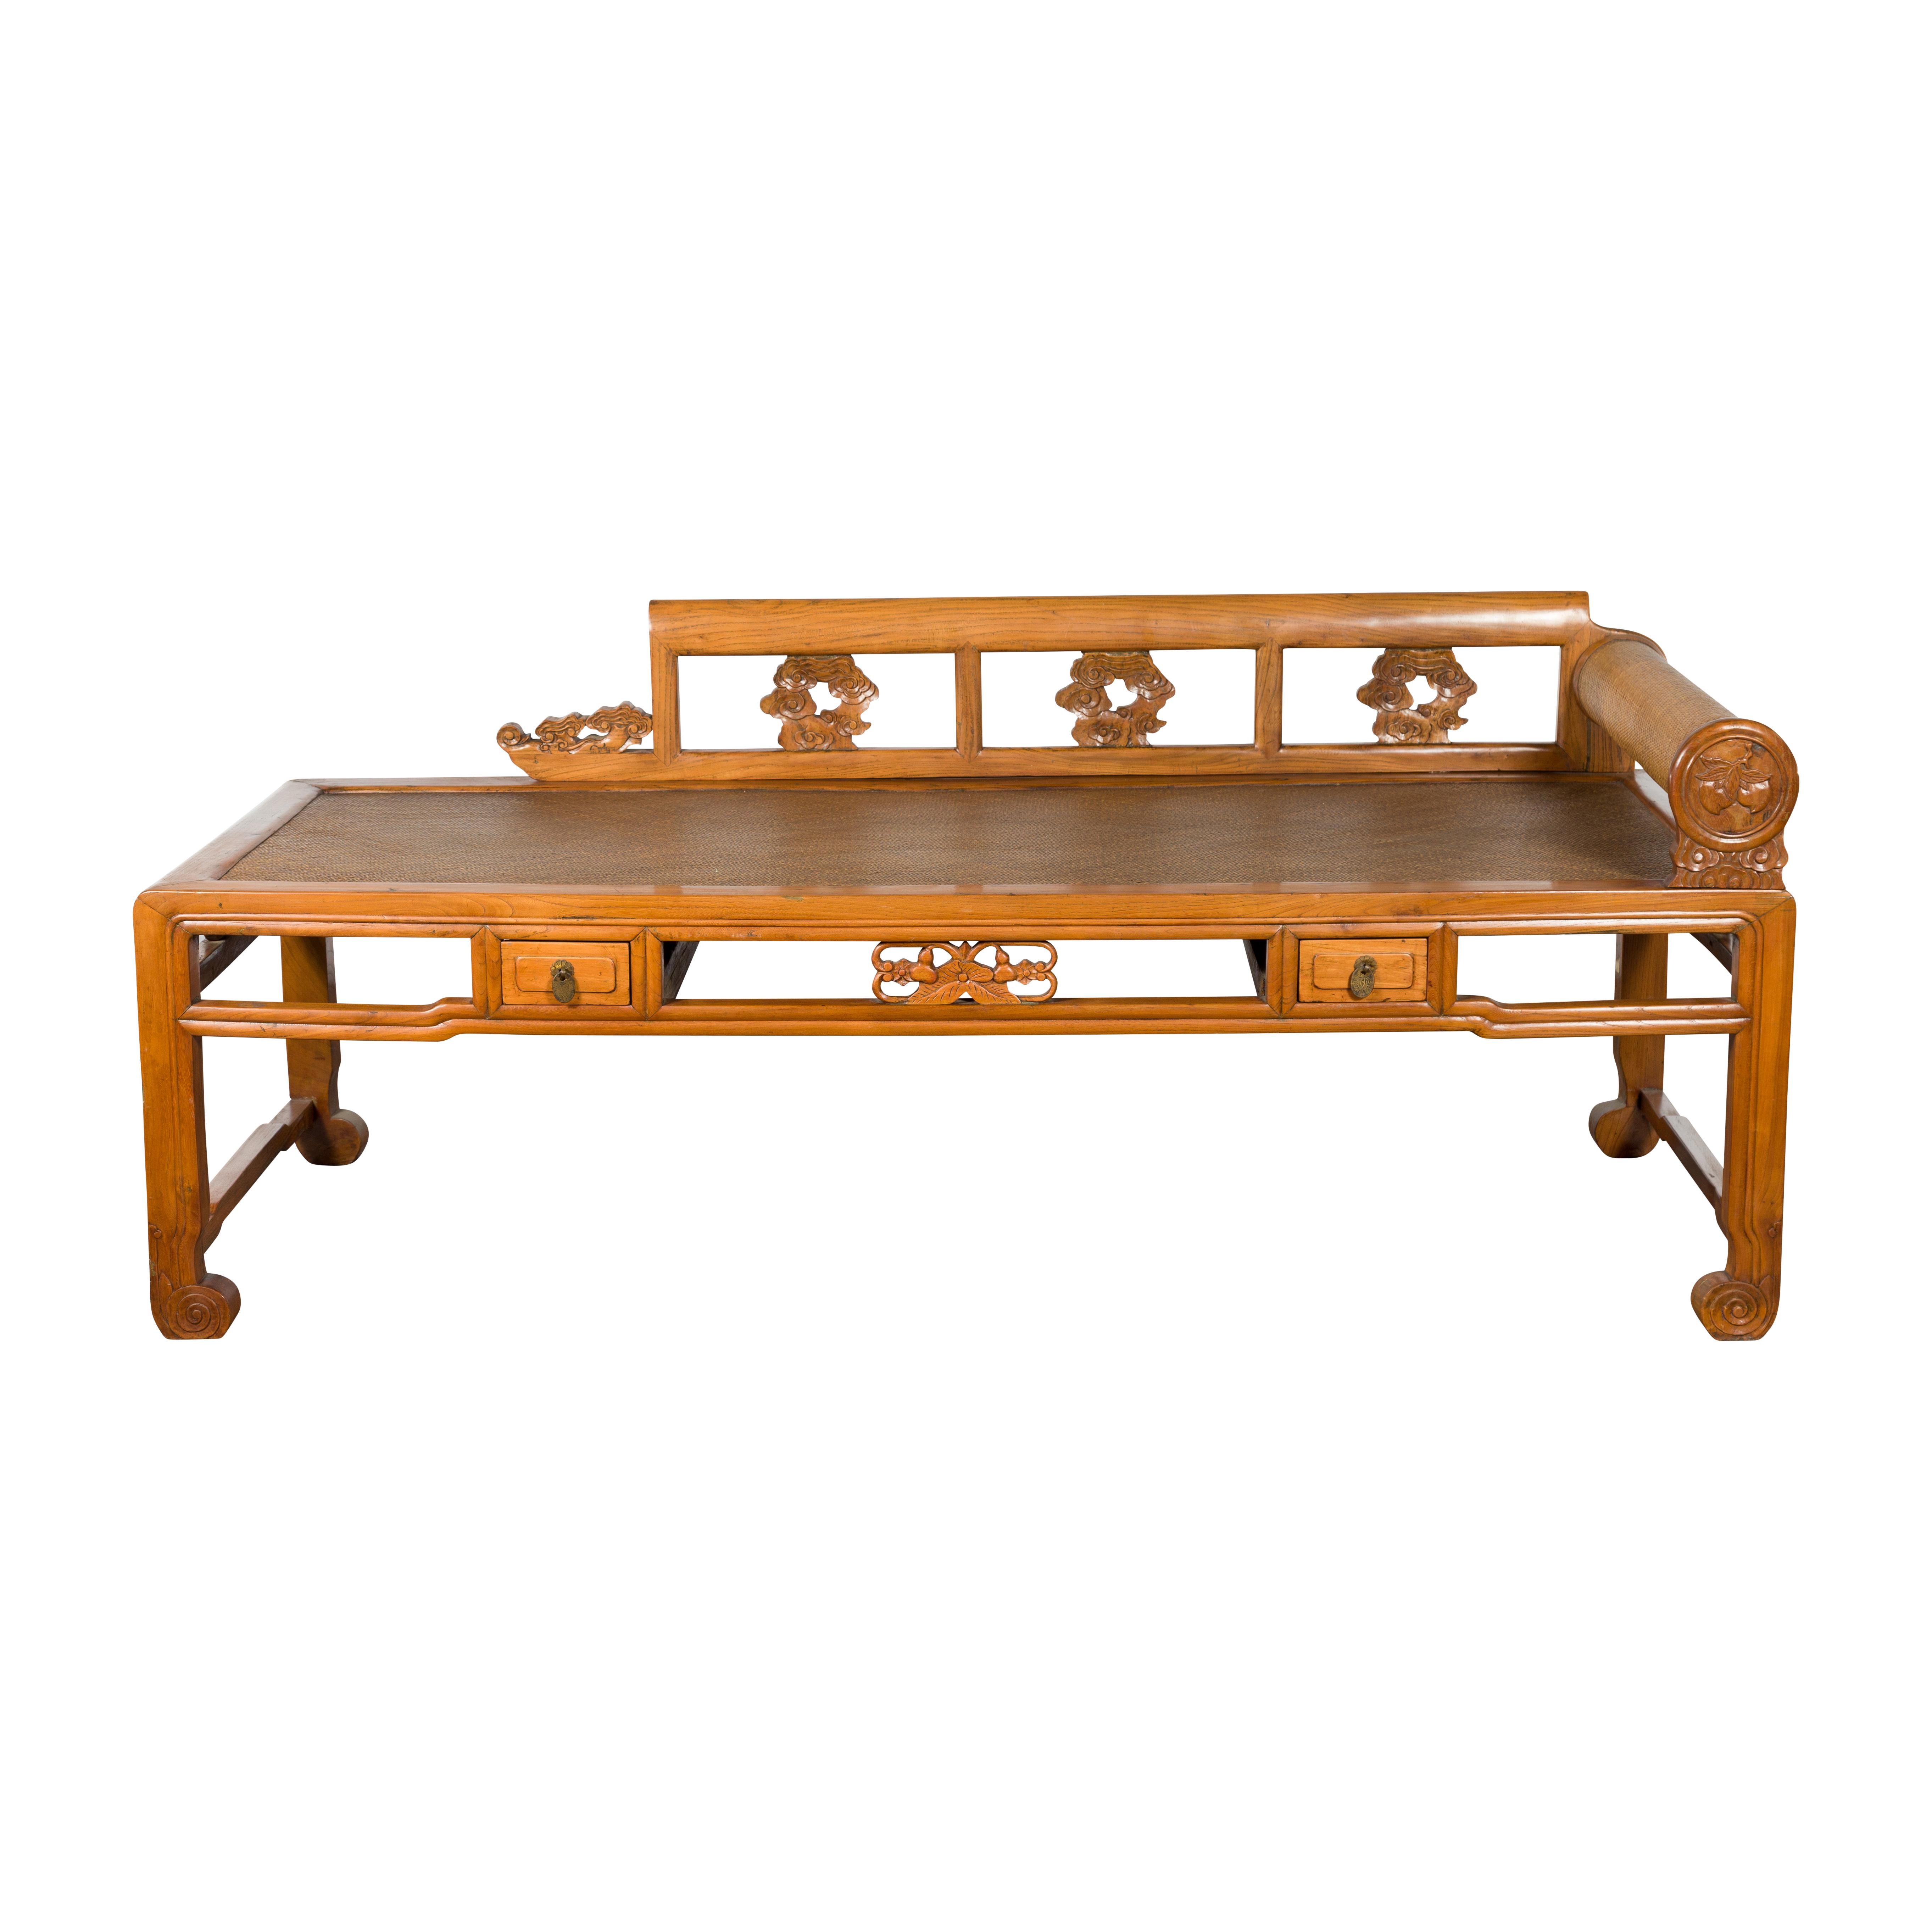 Qing Dynasty 19th Century Lady's Opium Daybed with Rattan Seat and Pillow For Sale 10